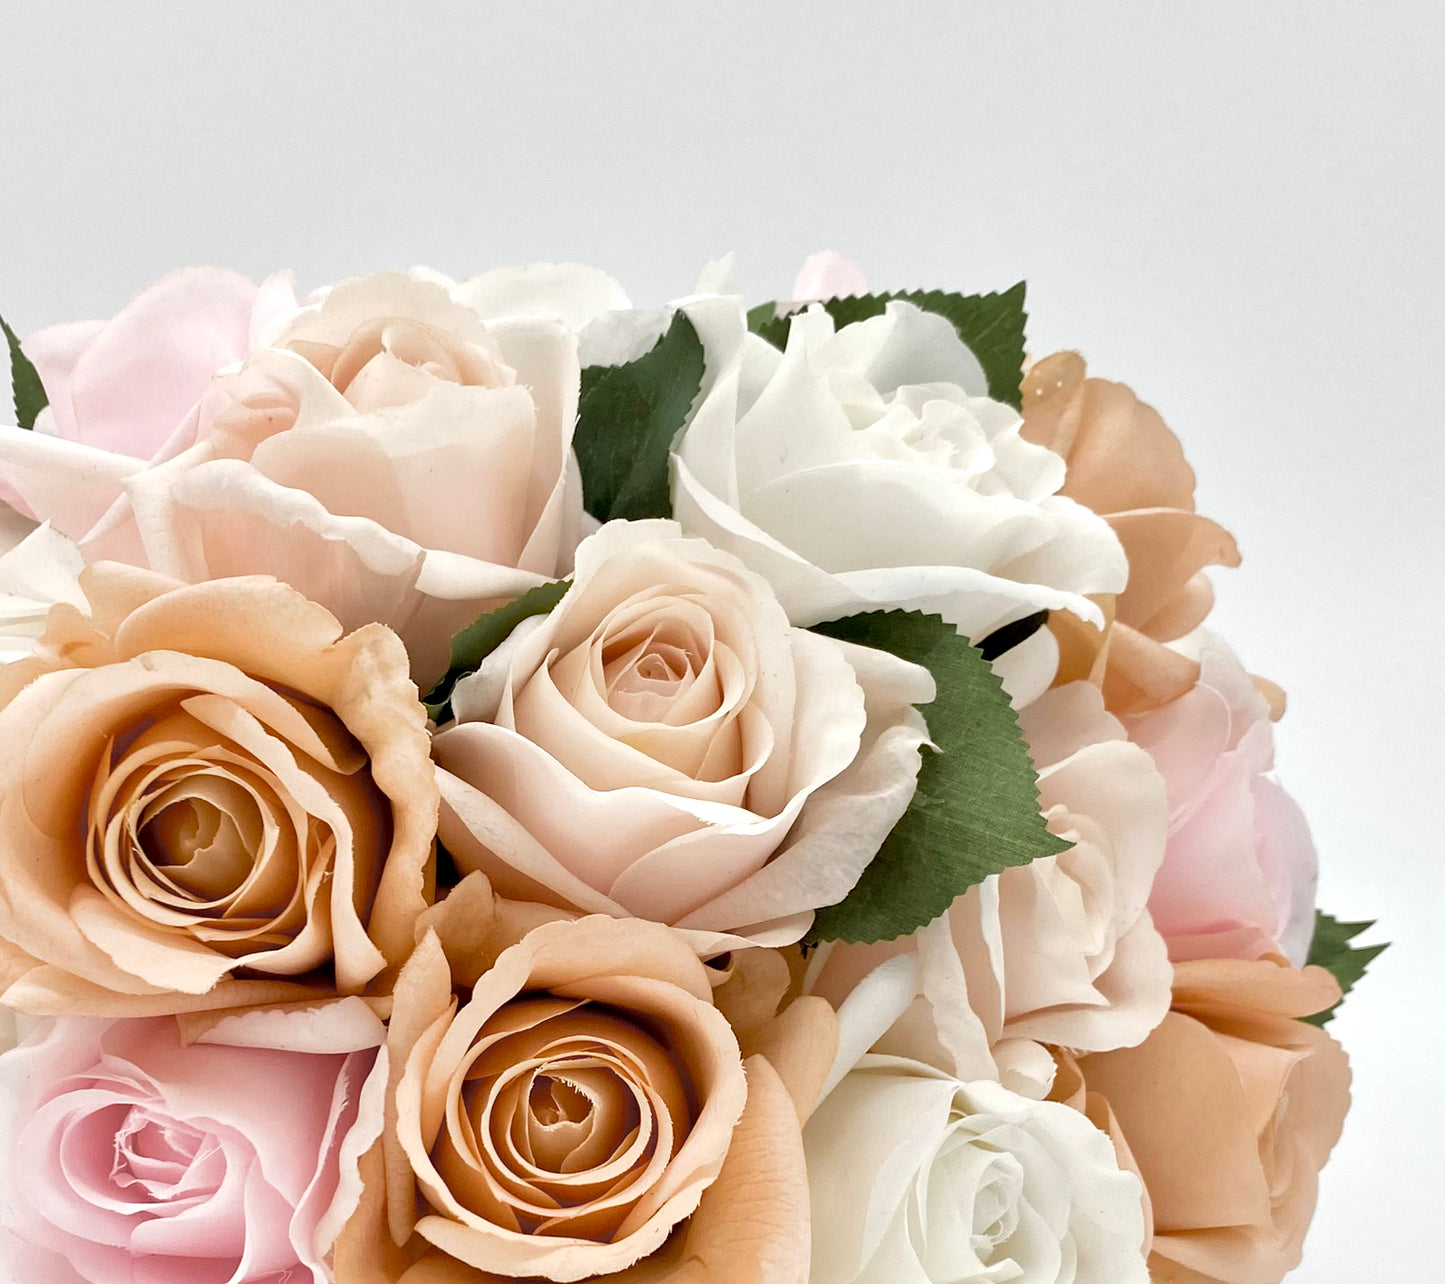 The Table Rose One: A stunning table centerpiece with elegant real touch roses